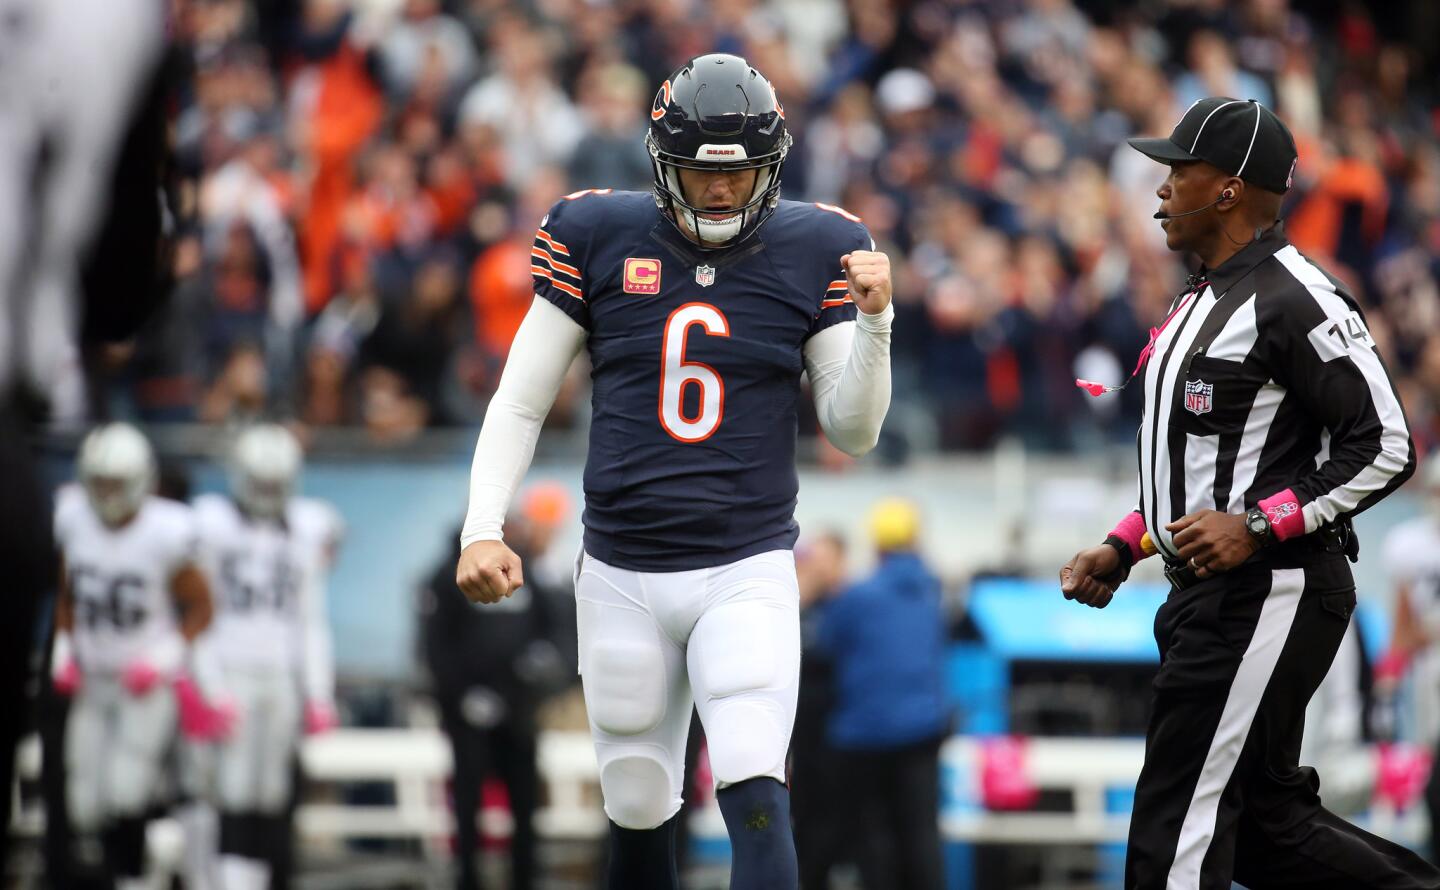 Jay Cutler celebrates his touchdown pass in the first quarter against the Raiders.